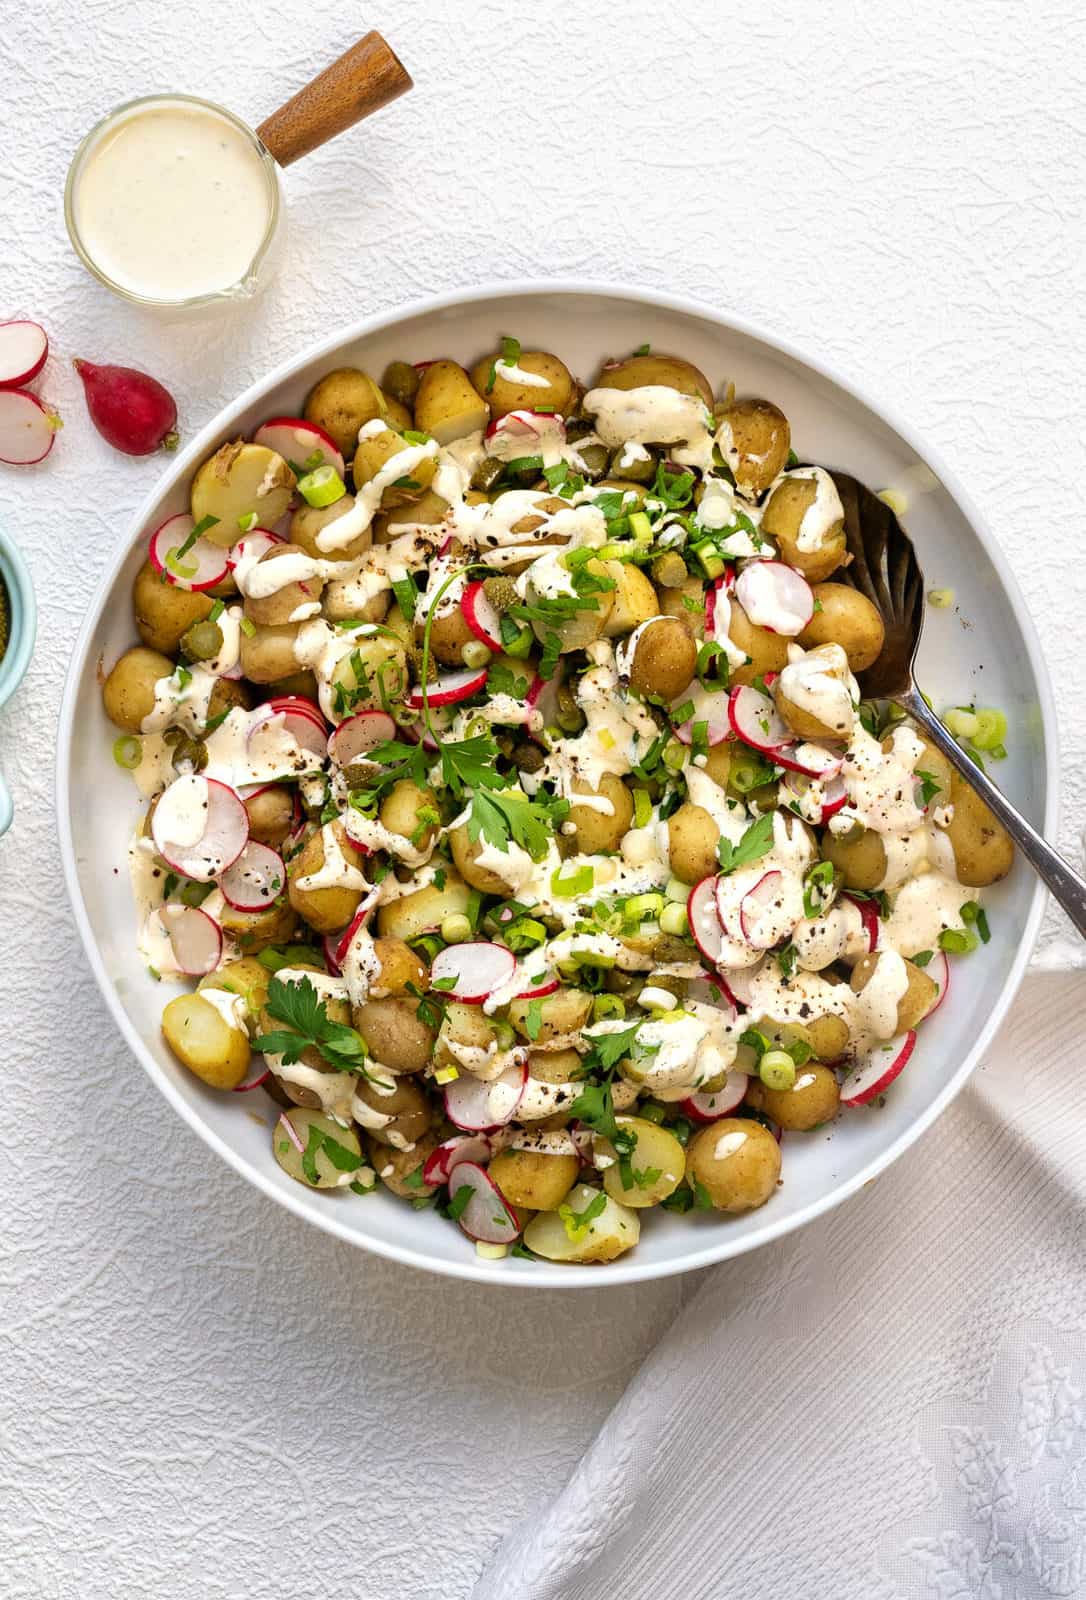 New potato salad with Jersey Royals, radish, spring onions, pickles and a healthy creamy dressing in a bowl